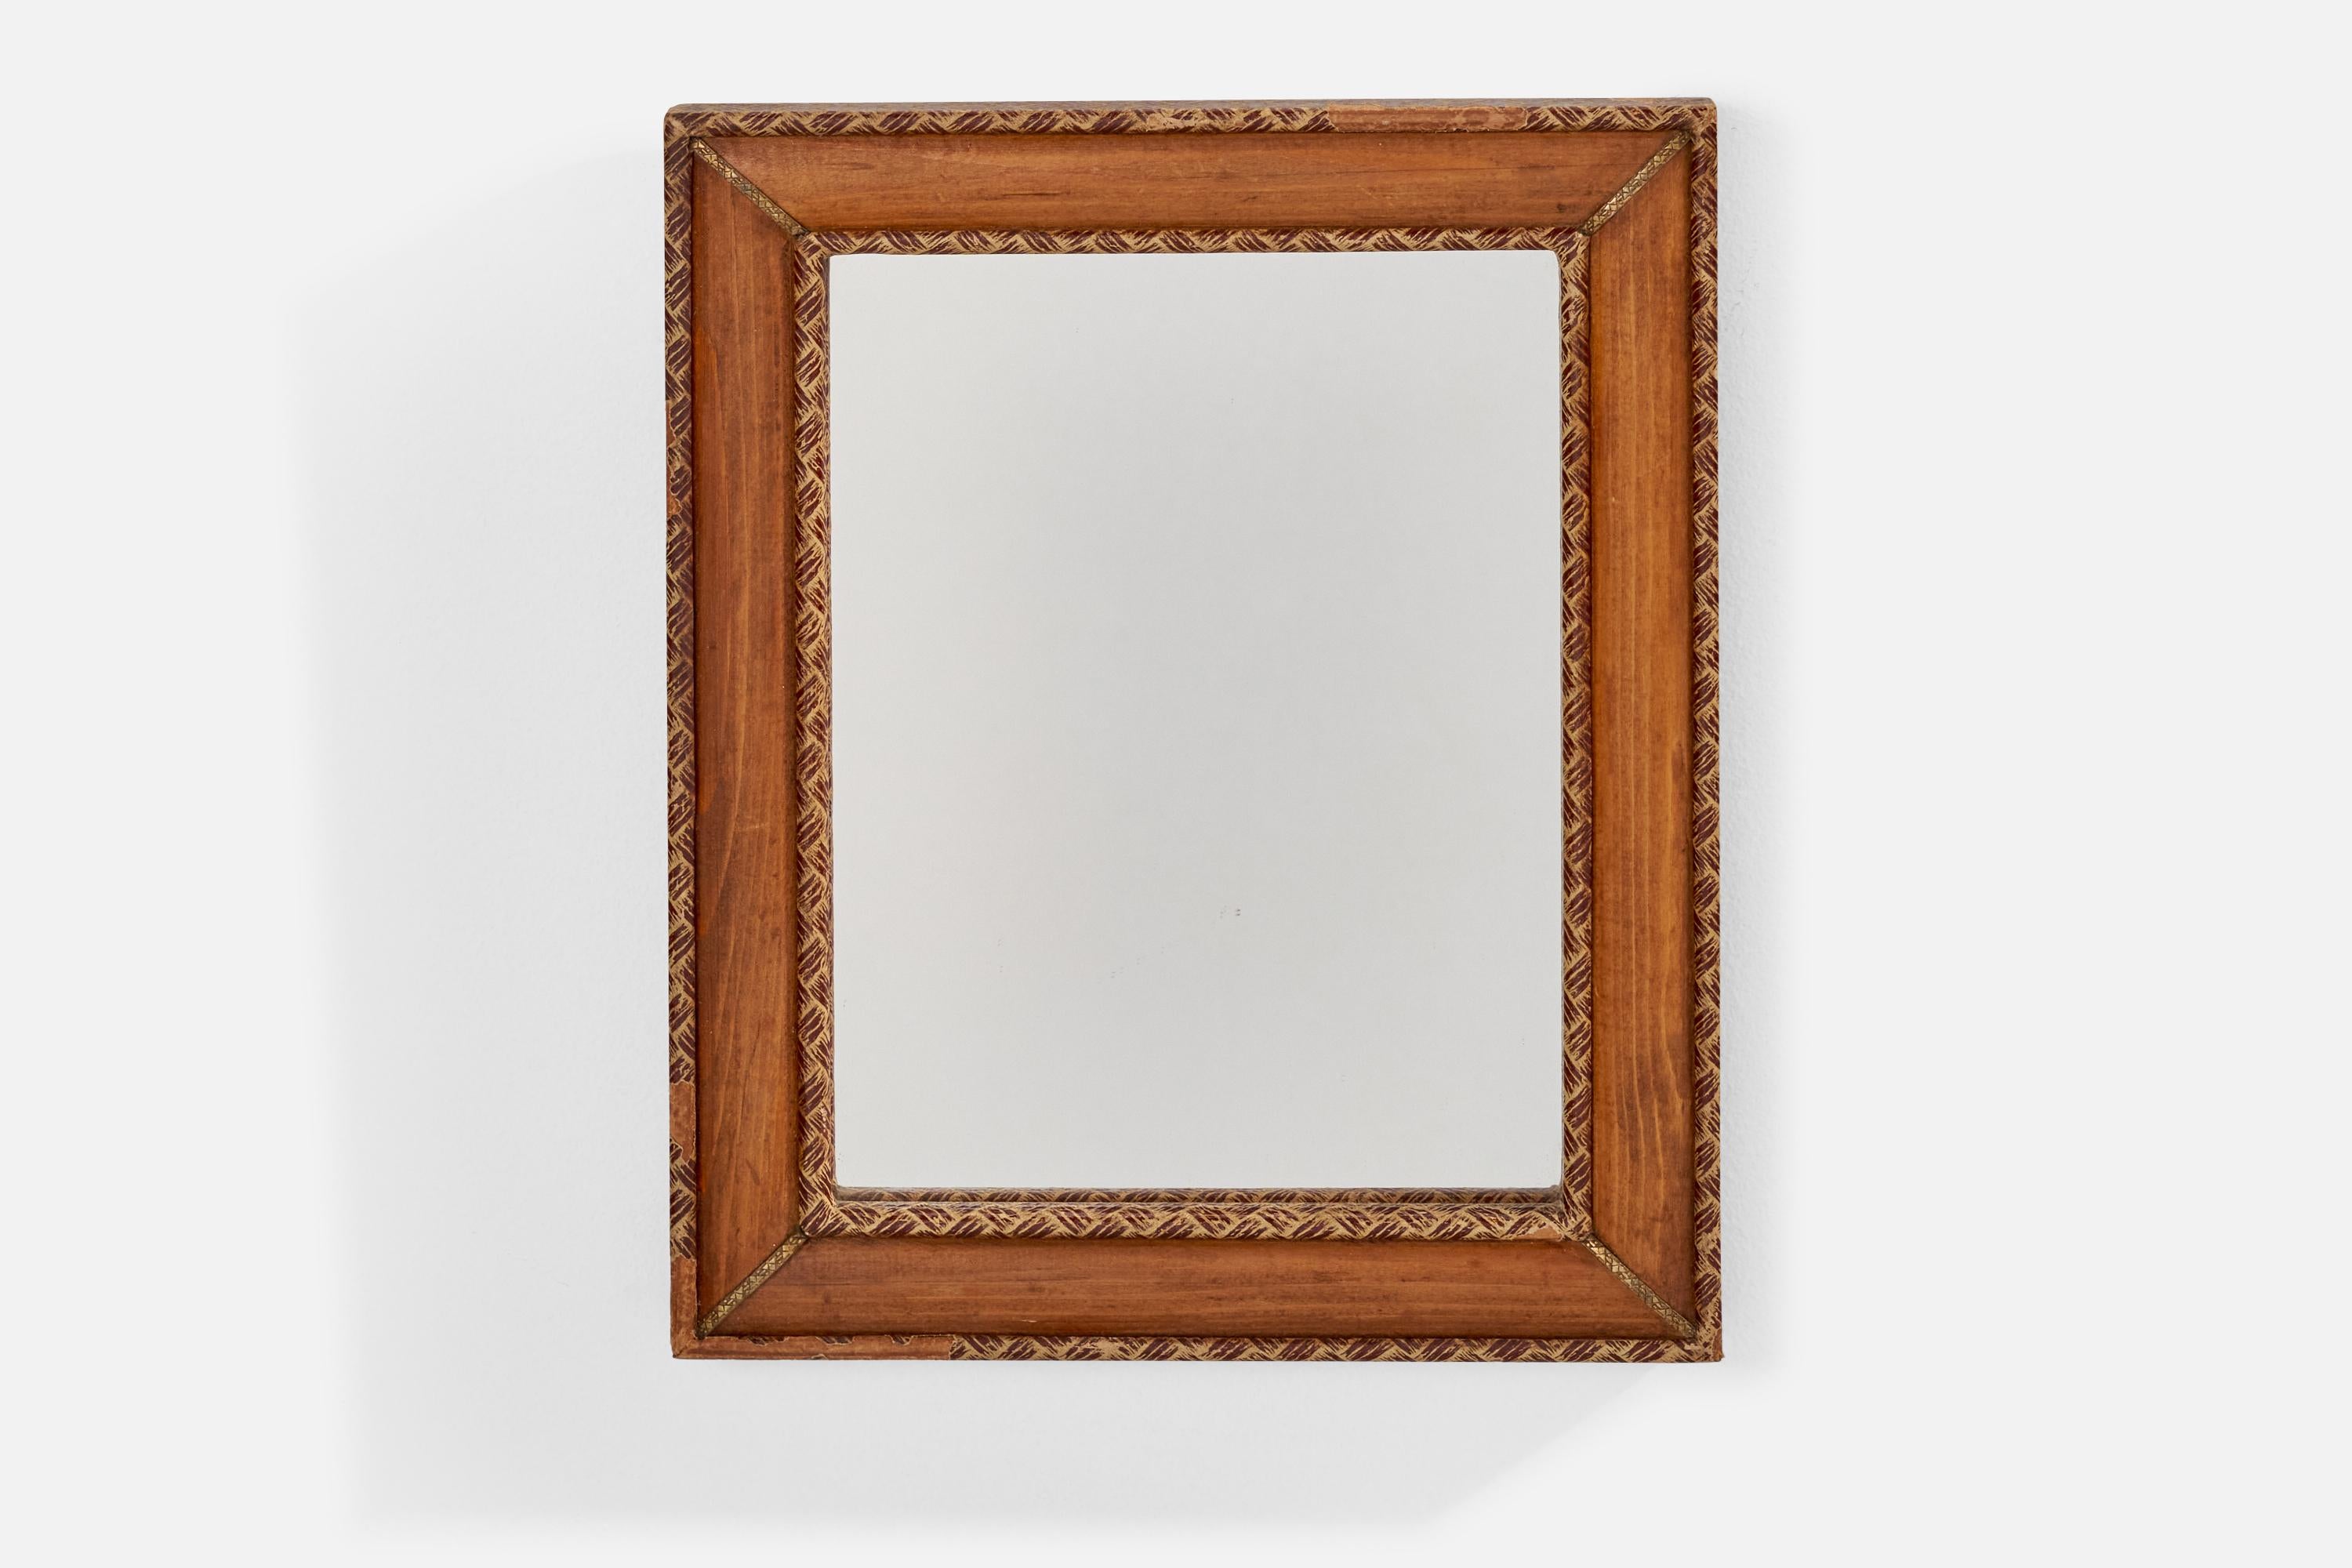 A wood, brass and leather wall mirror designed and produced in Italy, c. 1930s.
  